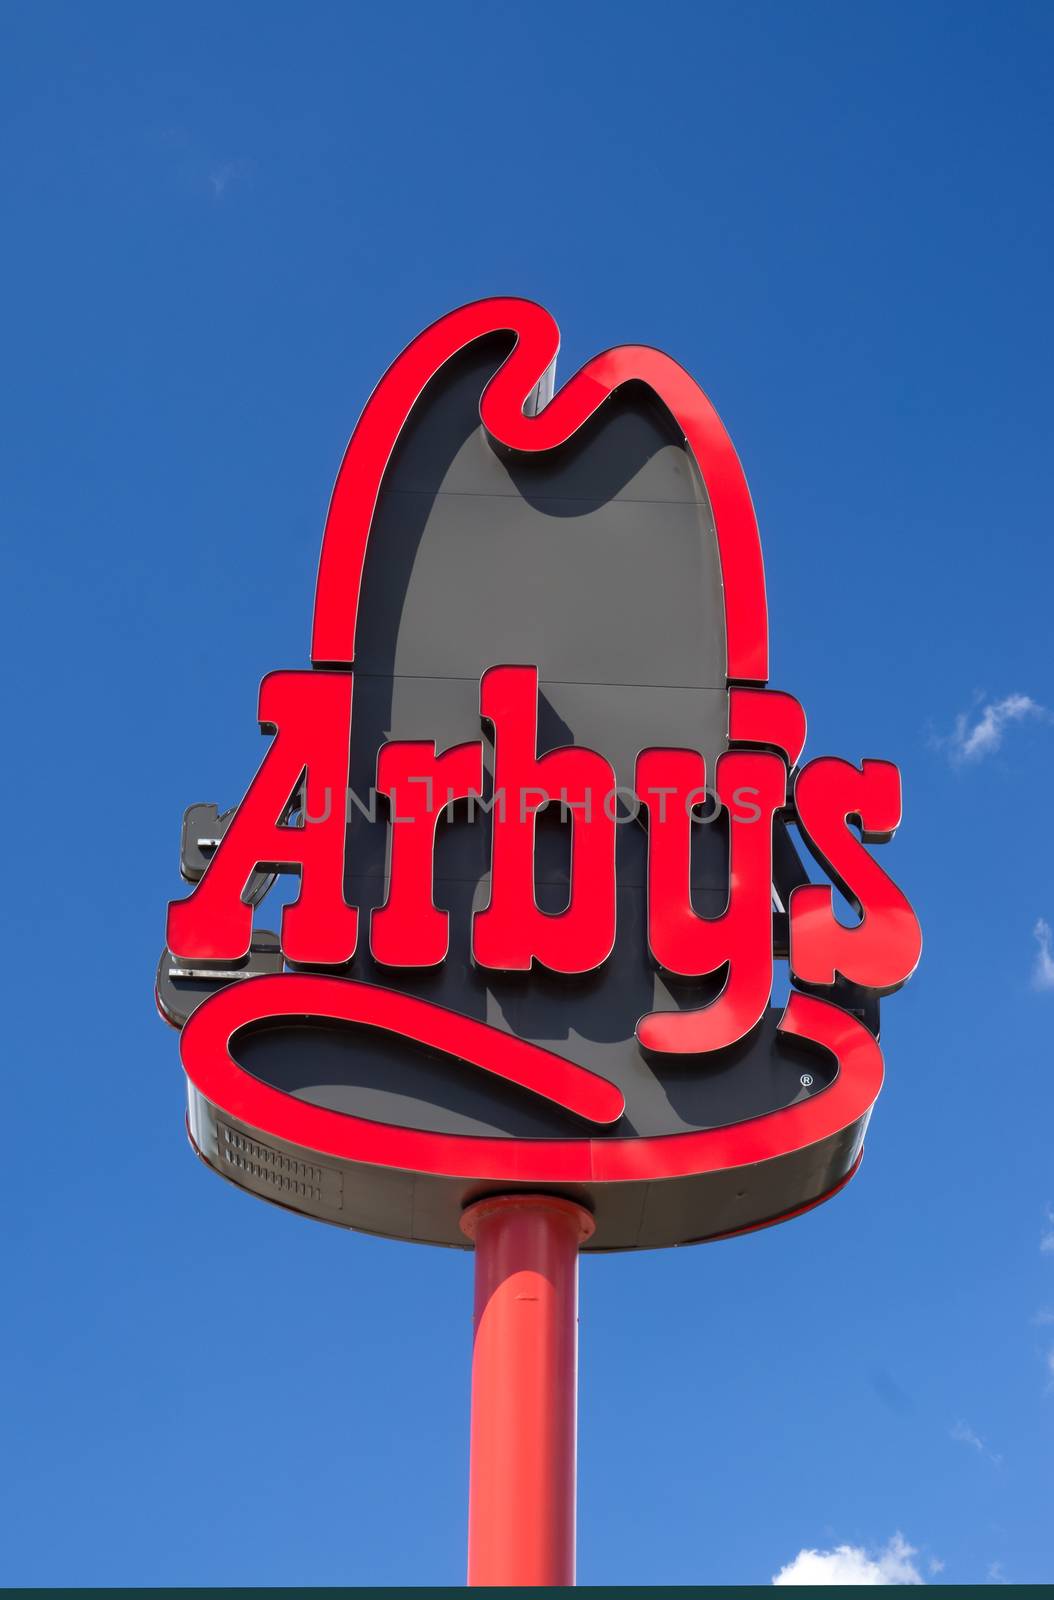 Arby's Restaurant Sign and Exterior by wolterk